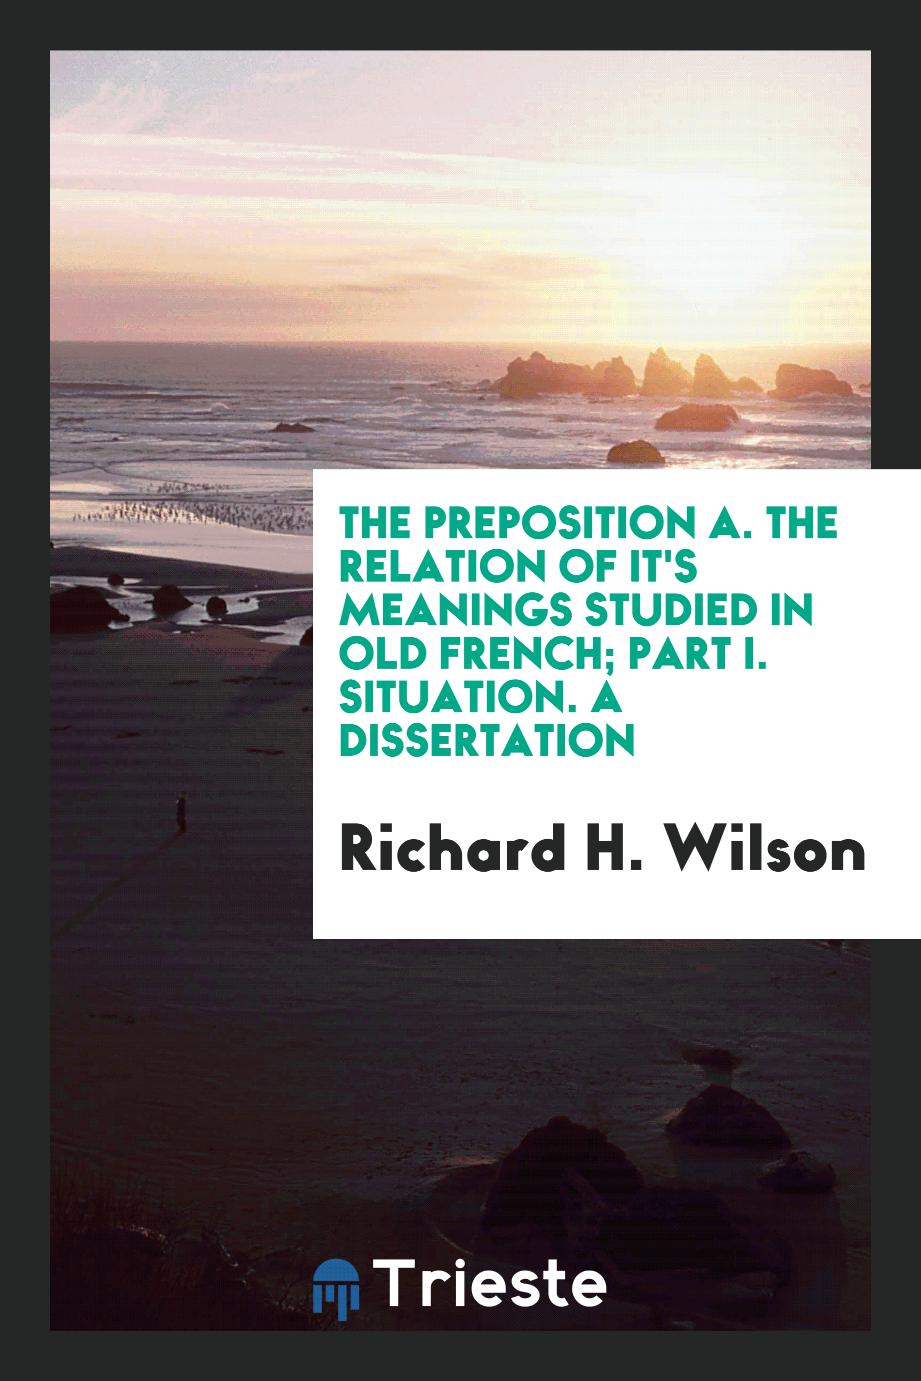 the preposition A. the relation of it's meanings studied in old french; part I. situation. A dissertation